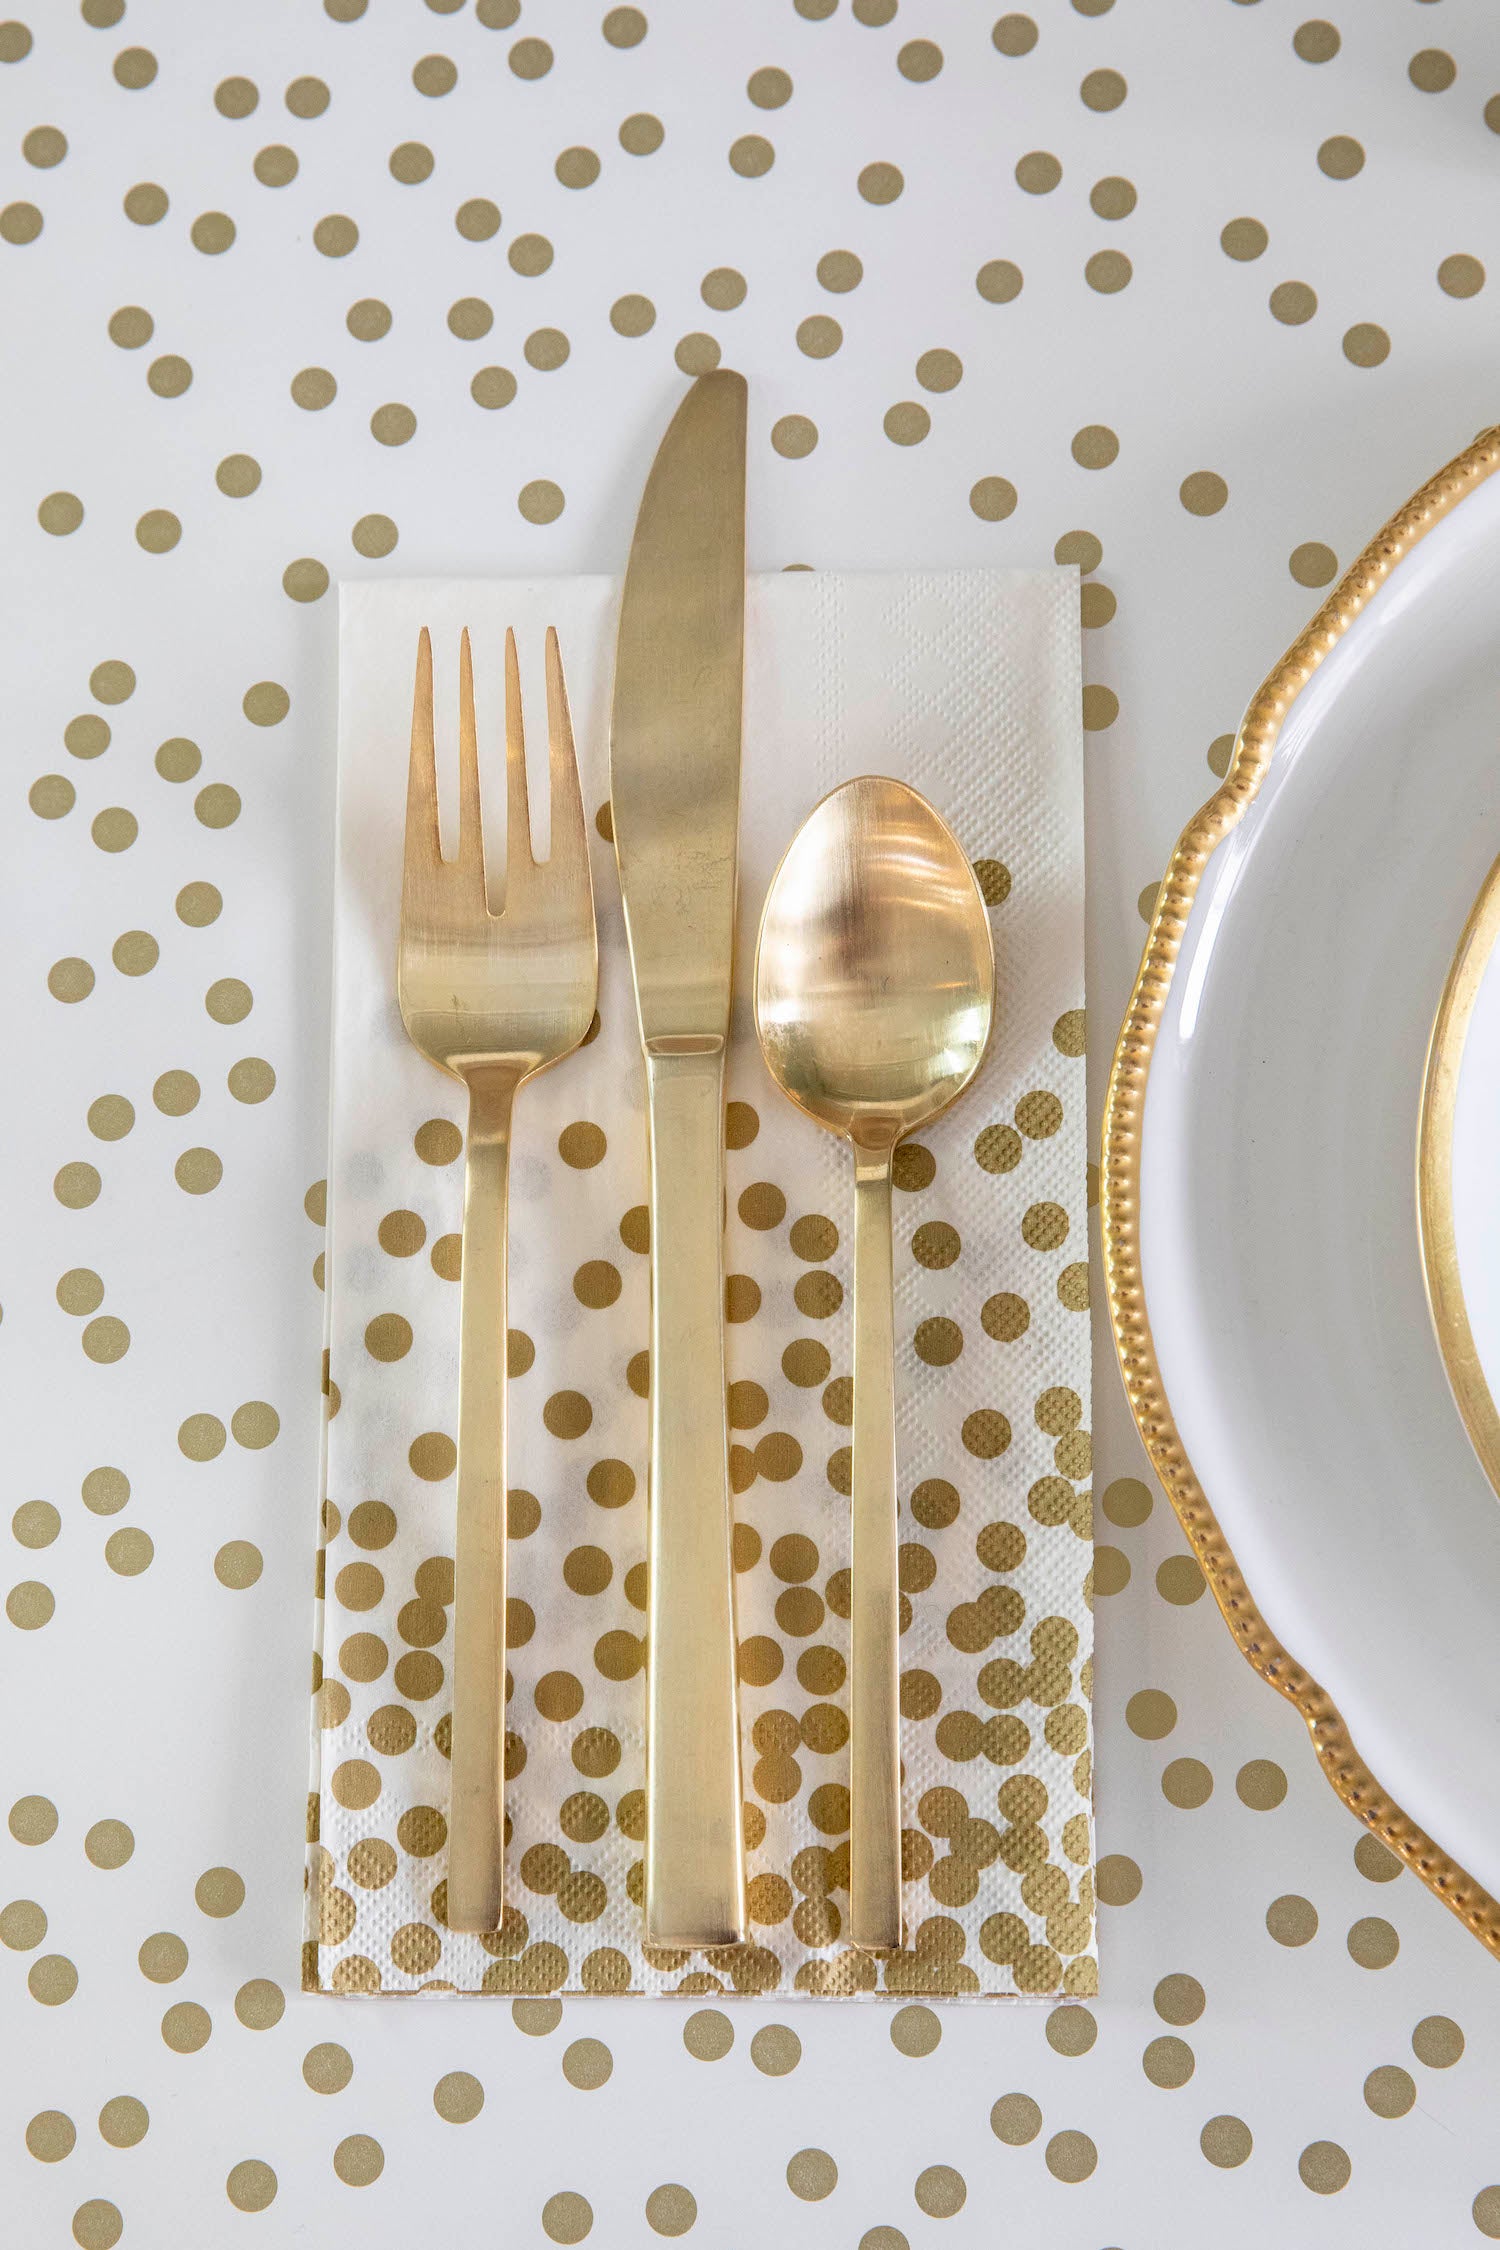 A Gold Confetti Guest napkin under gold cutlery next to a gold-rimmed plate, on a gold confetti table runner.